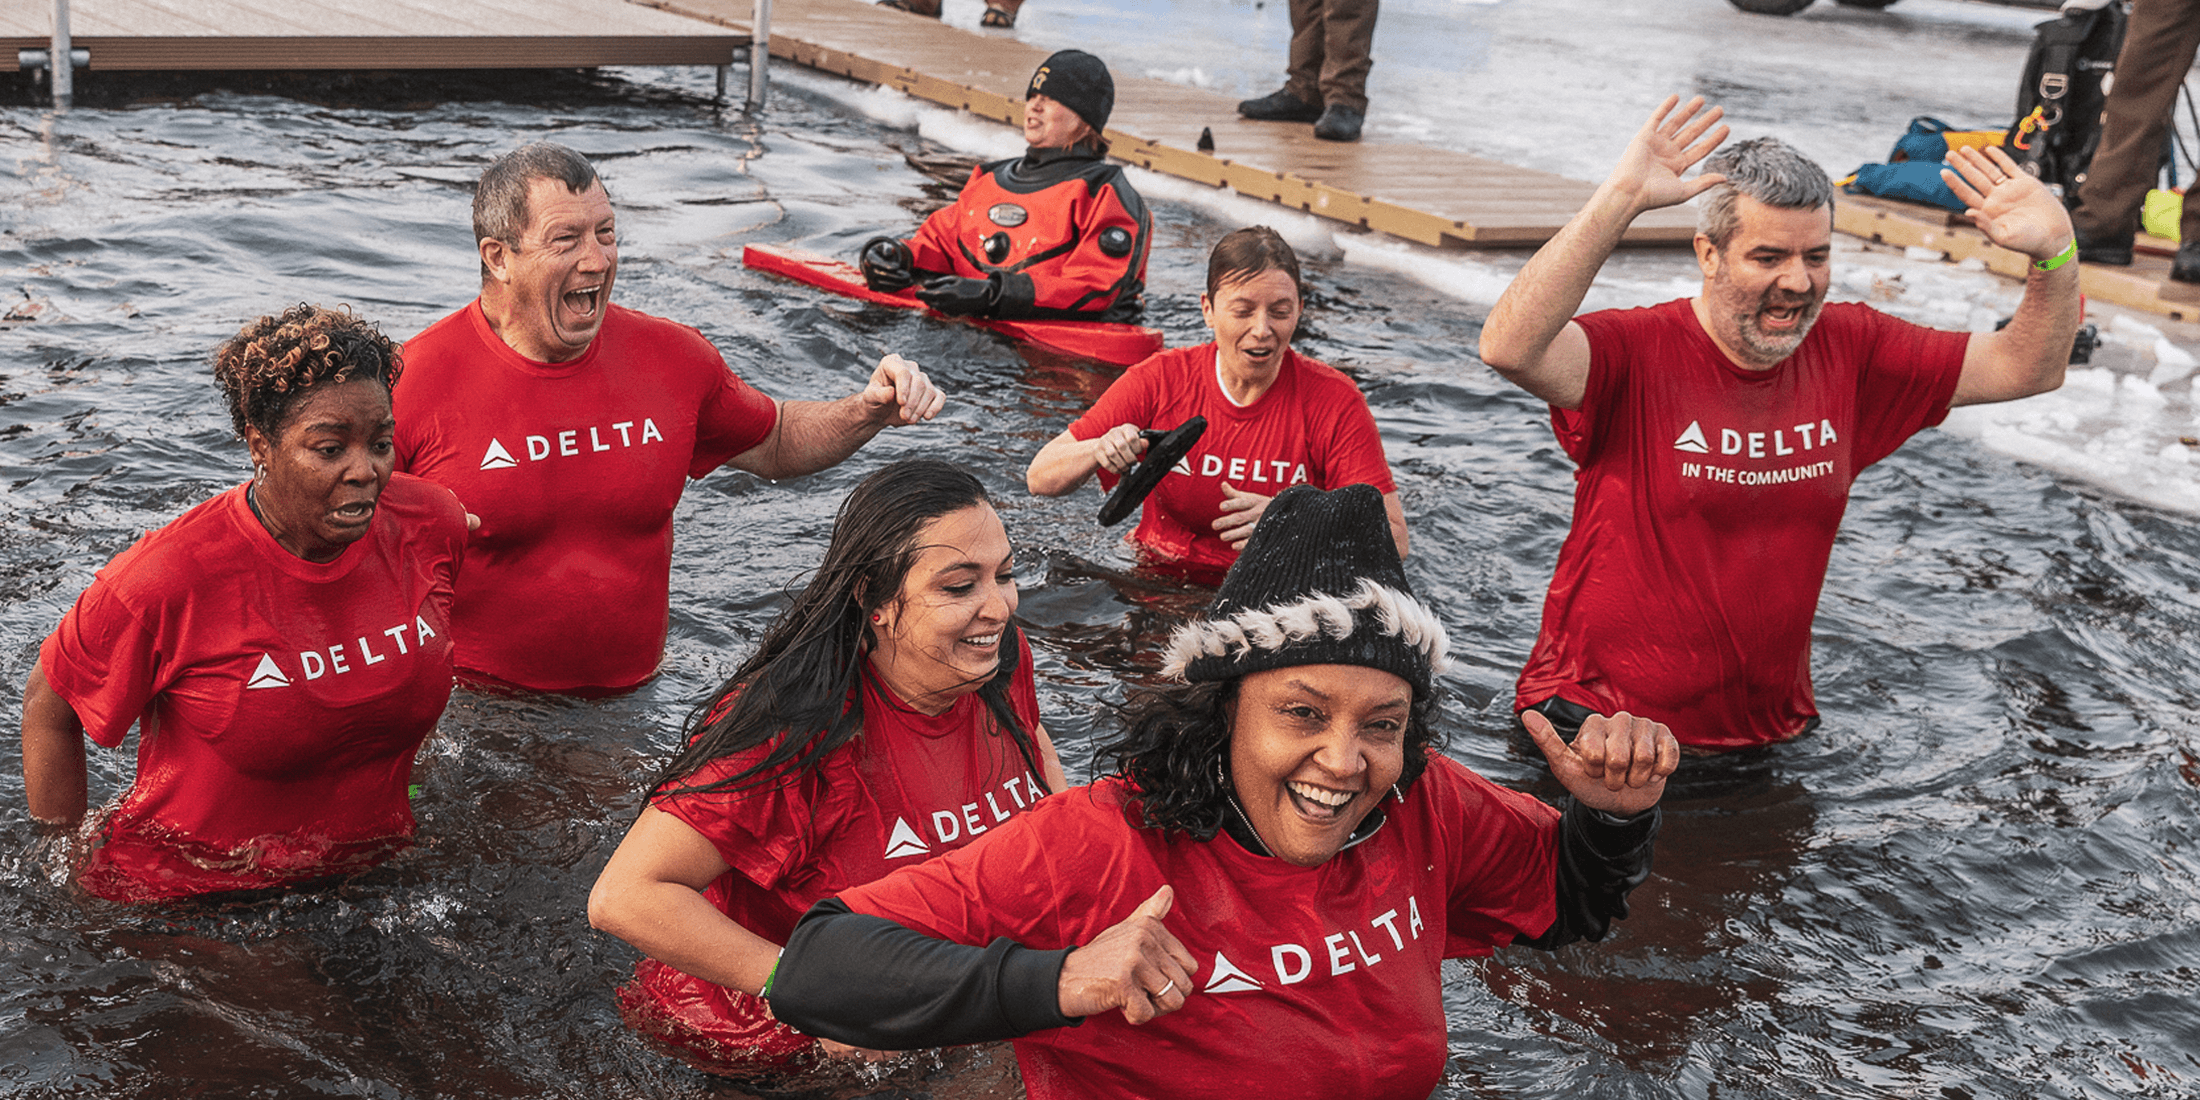 A group of smiling Delta Plungers wearing red shirts exit the Plunge hole